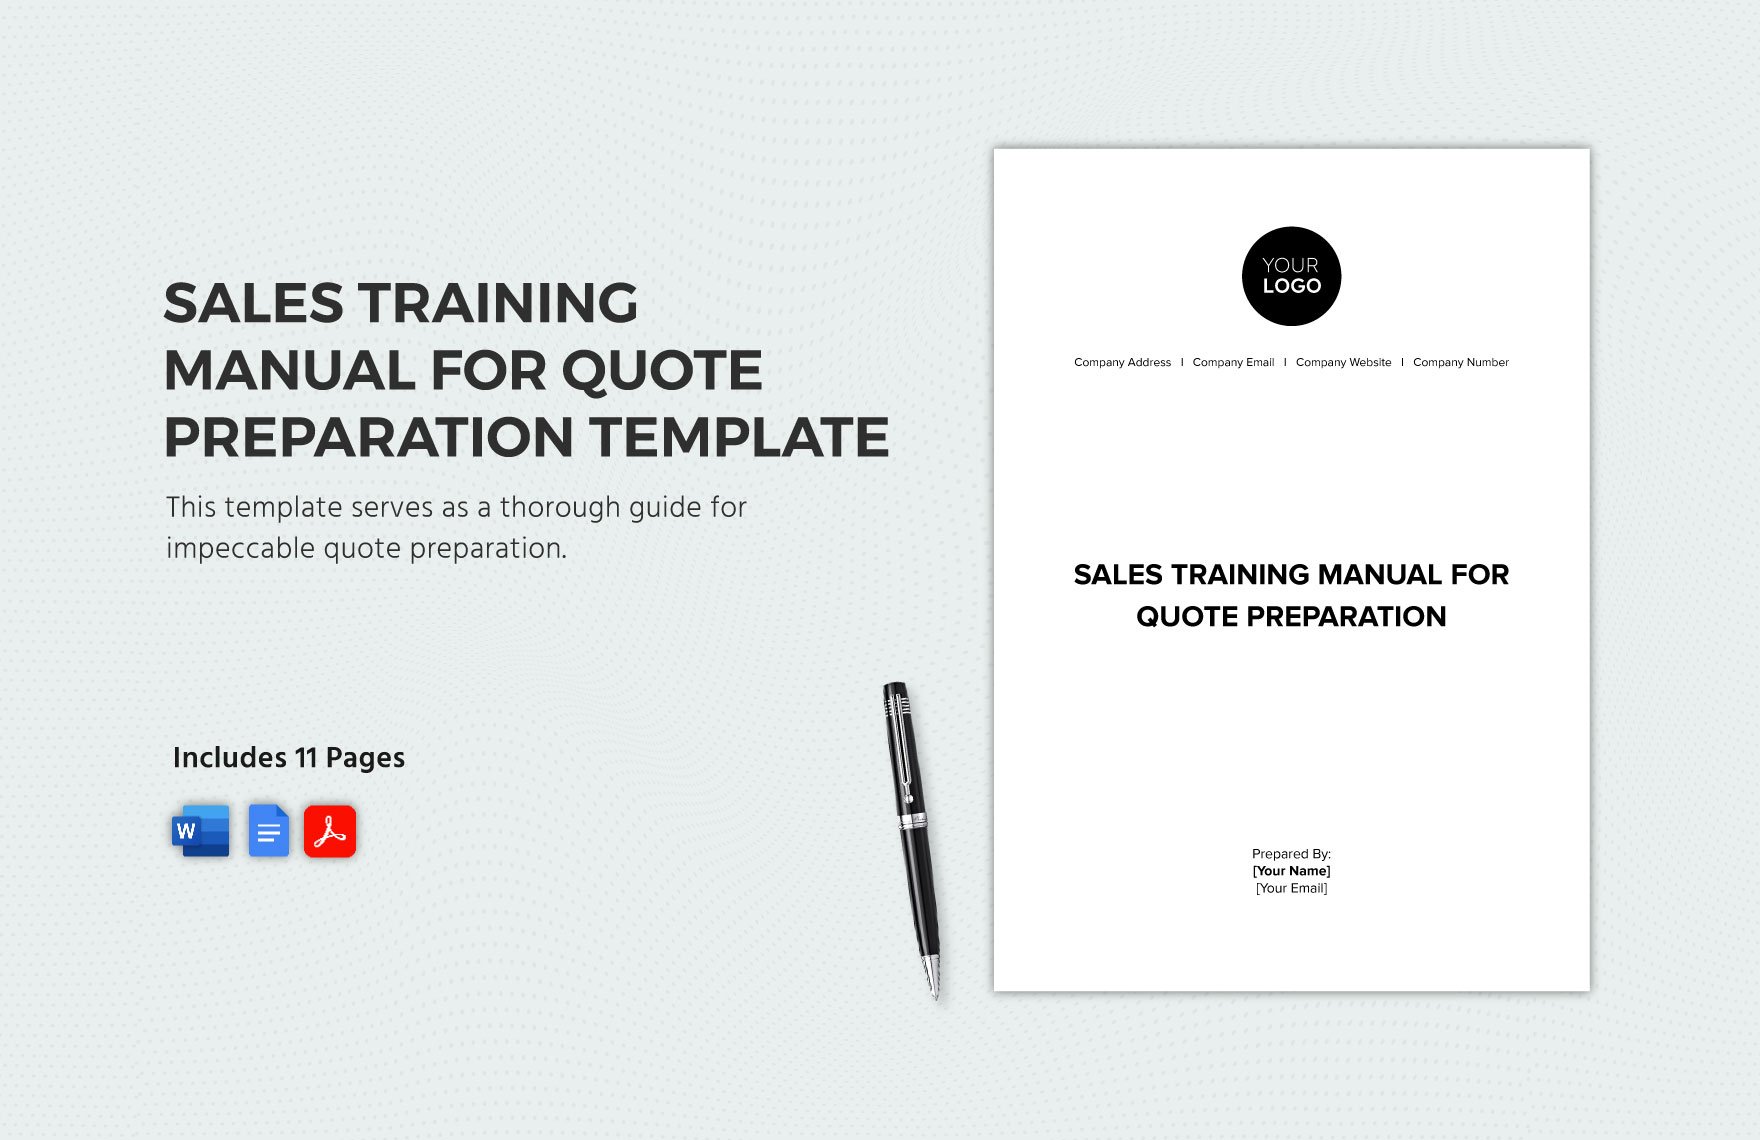 Sales Training Manual for Quote Preparation Template